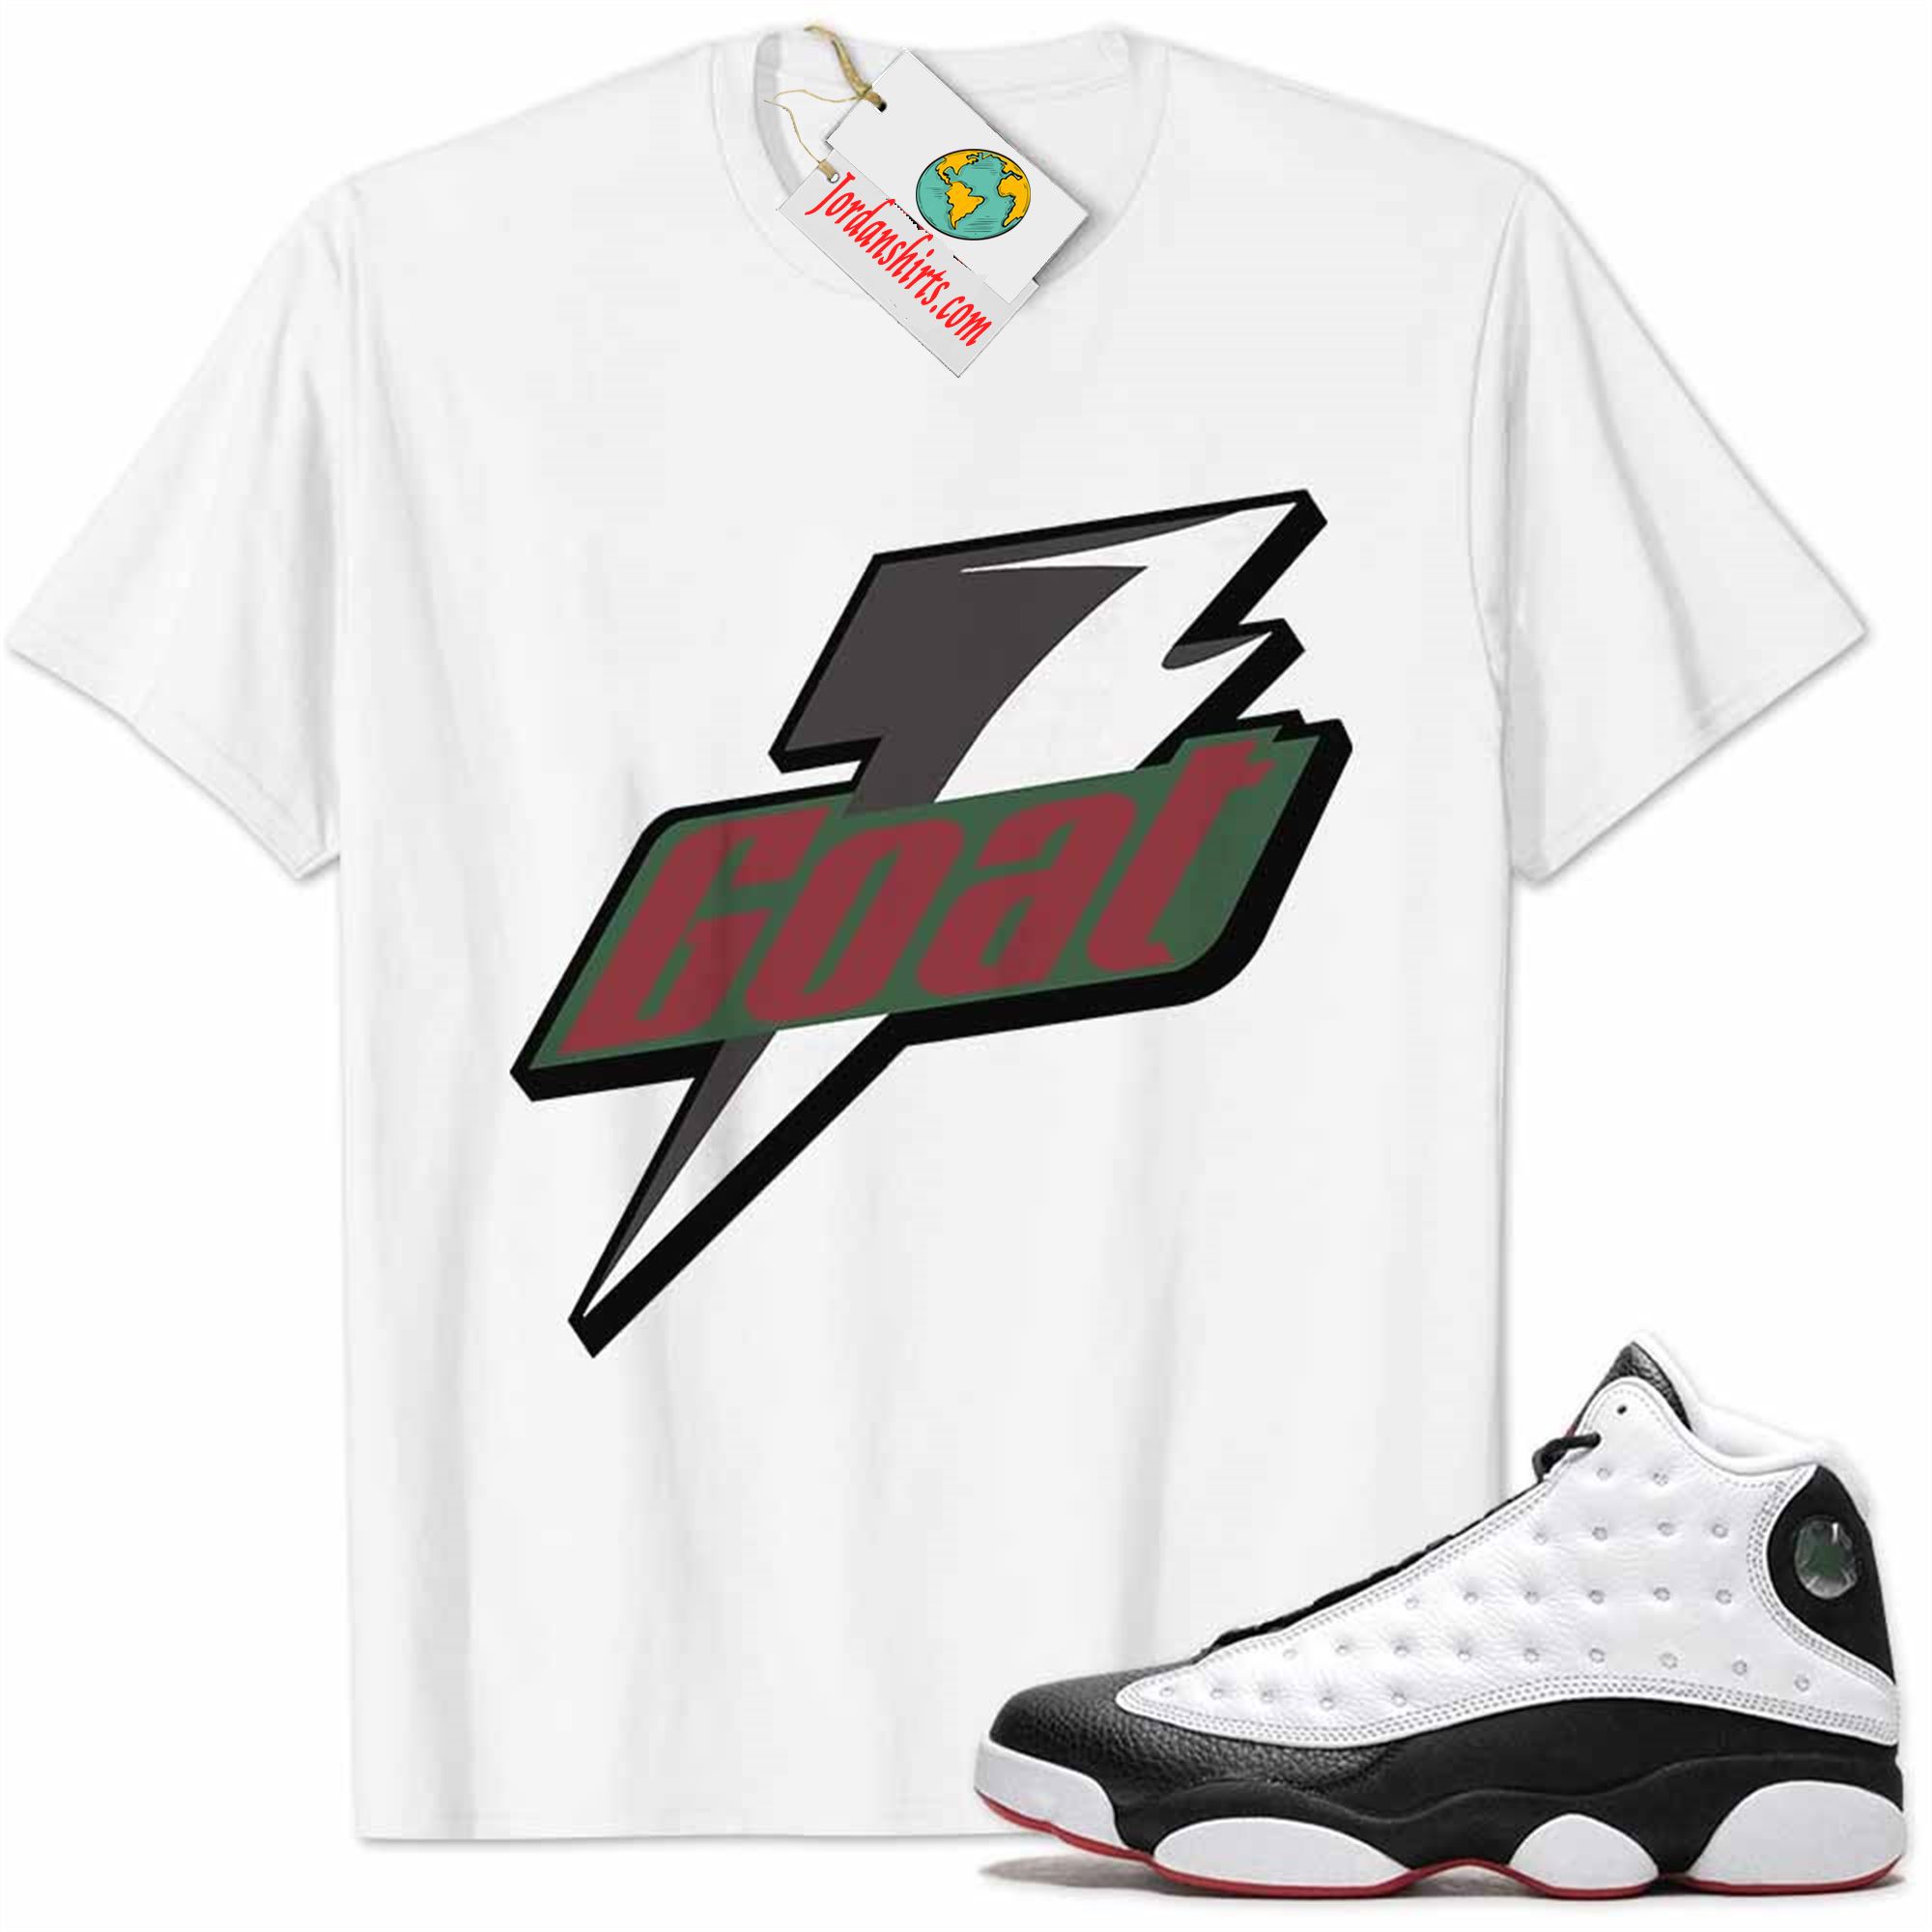 Jordan 13 Shirt, He Got Game 13s Shirt Goat Greatest Of All Time White Plus Size Up To 5xl